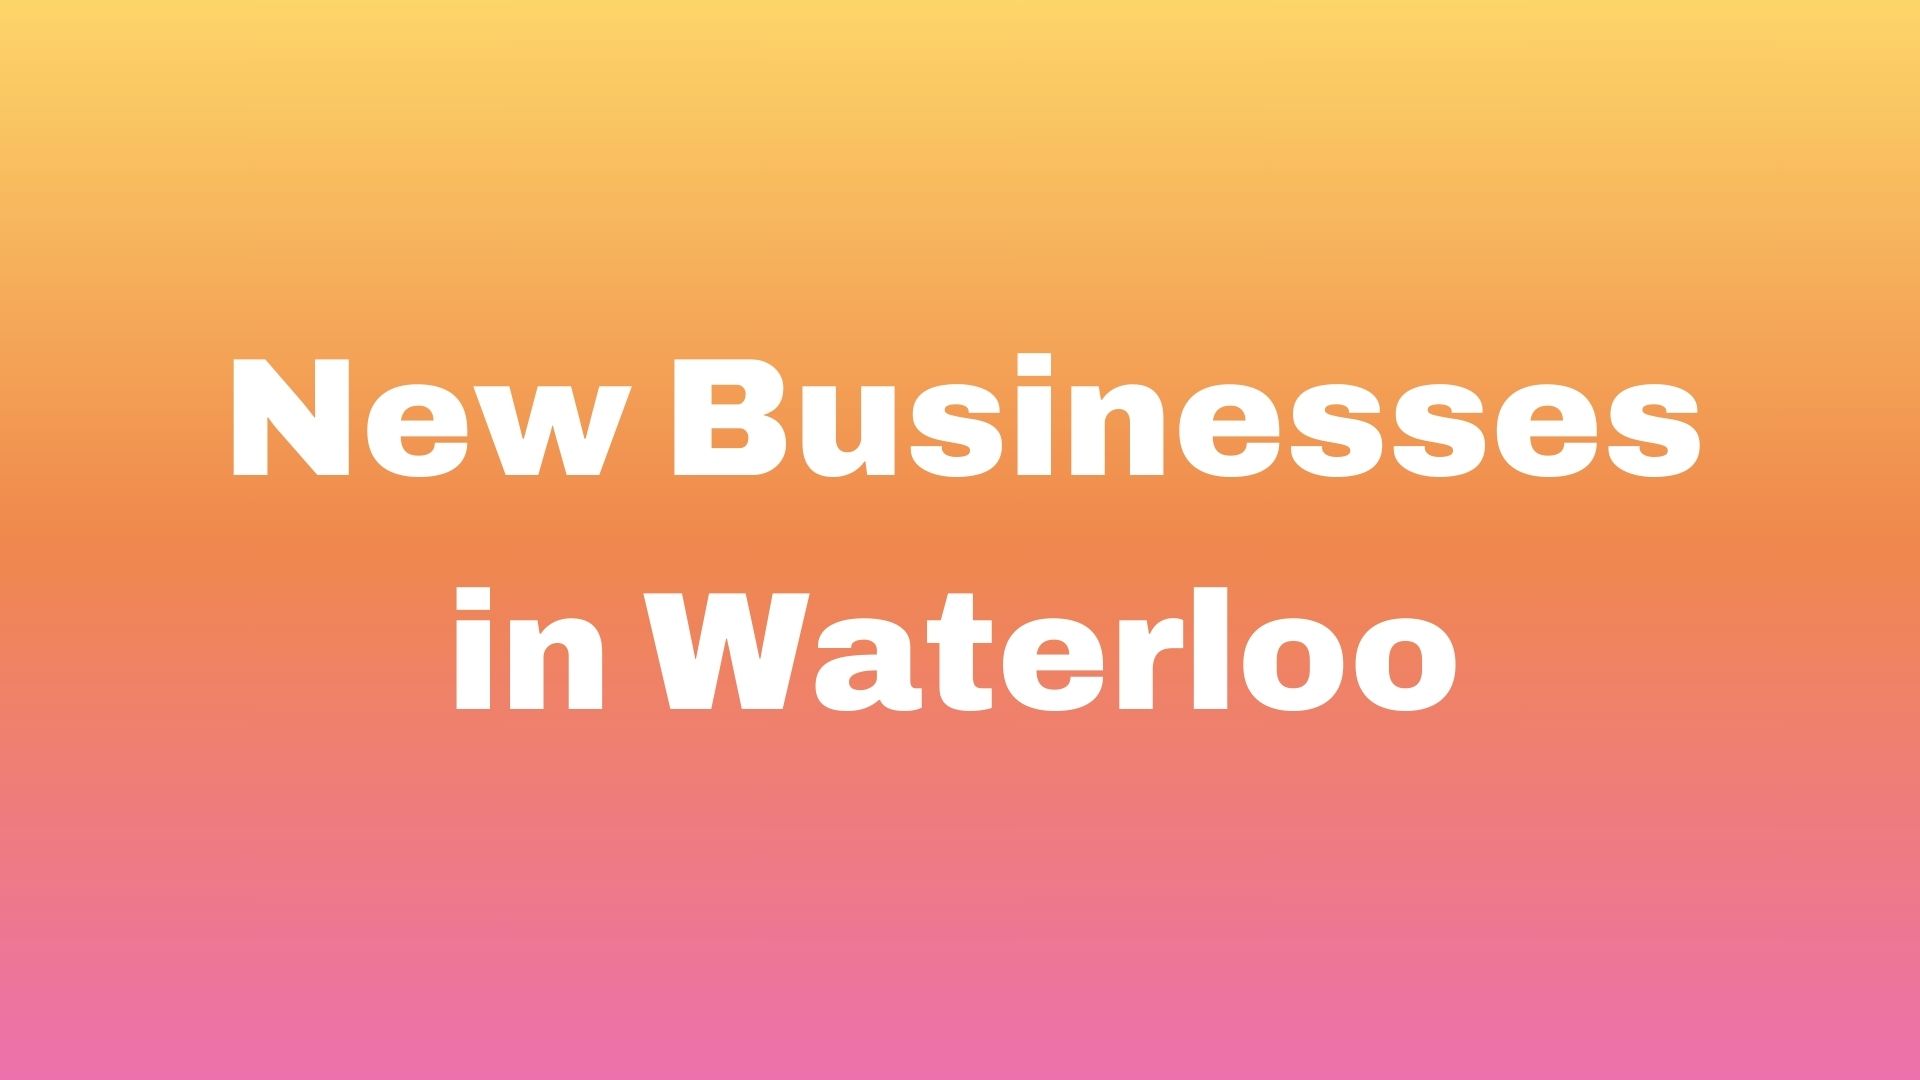 Two New Businesses in Waterloo